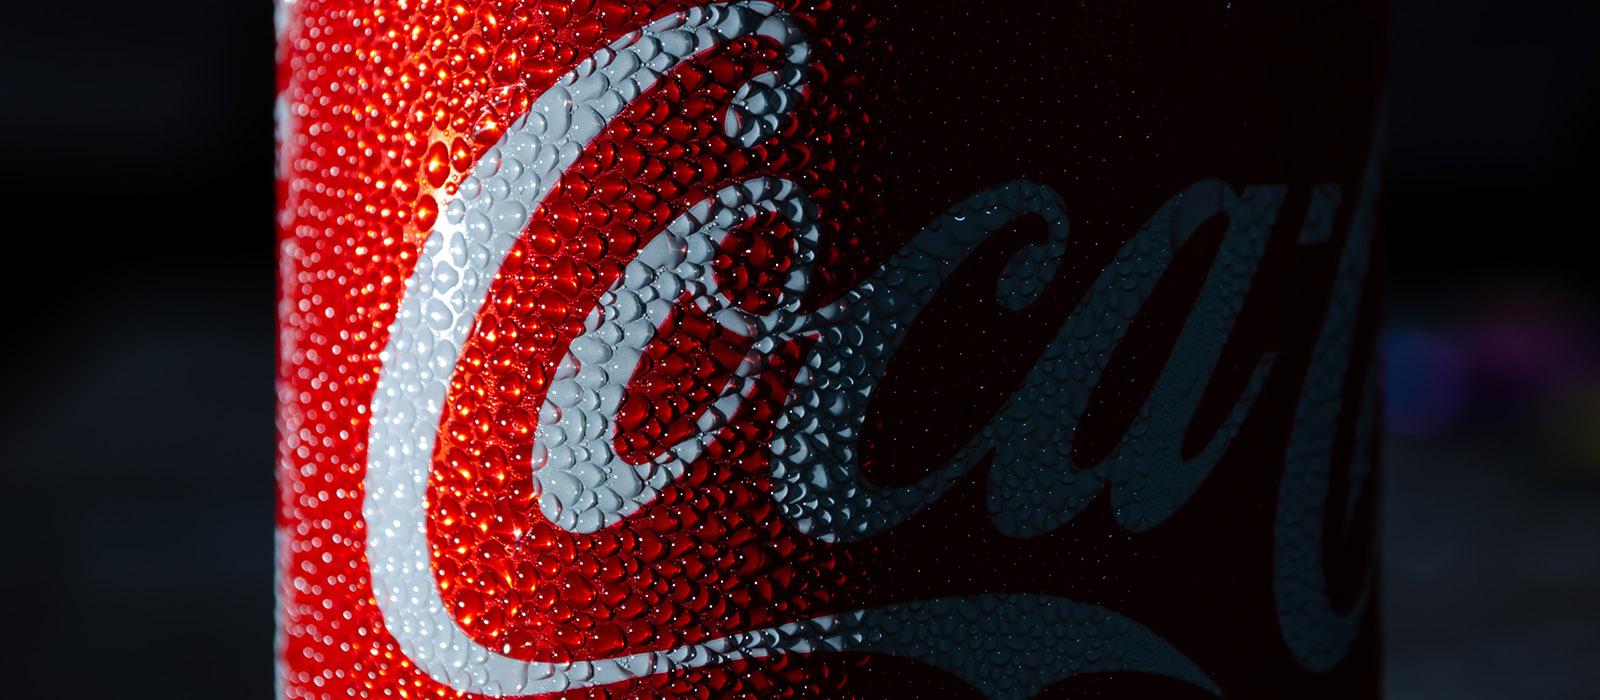 Detail of small droplets outside a Coca-Cola can on a dark background